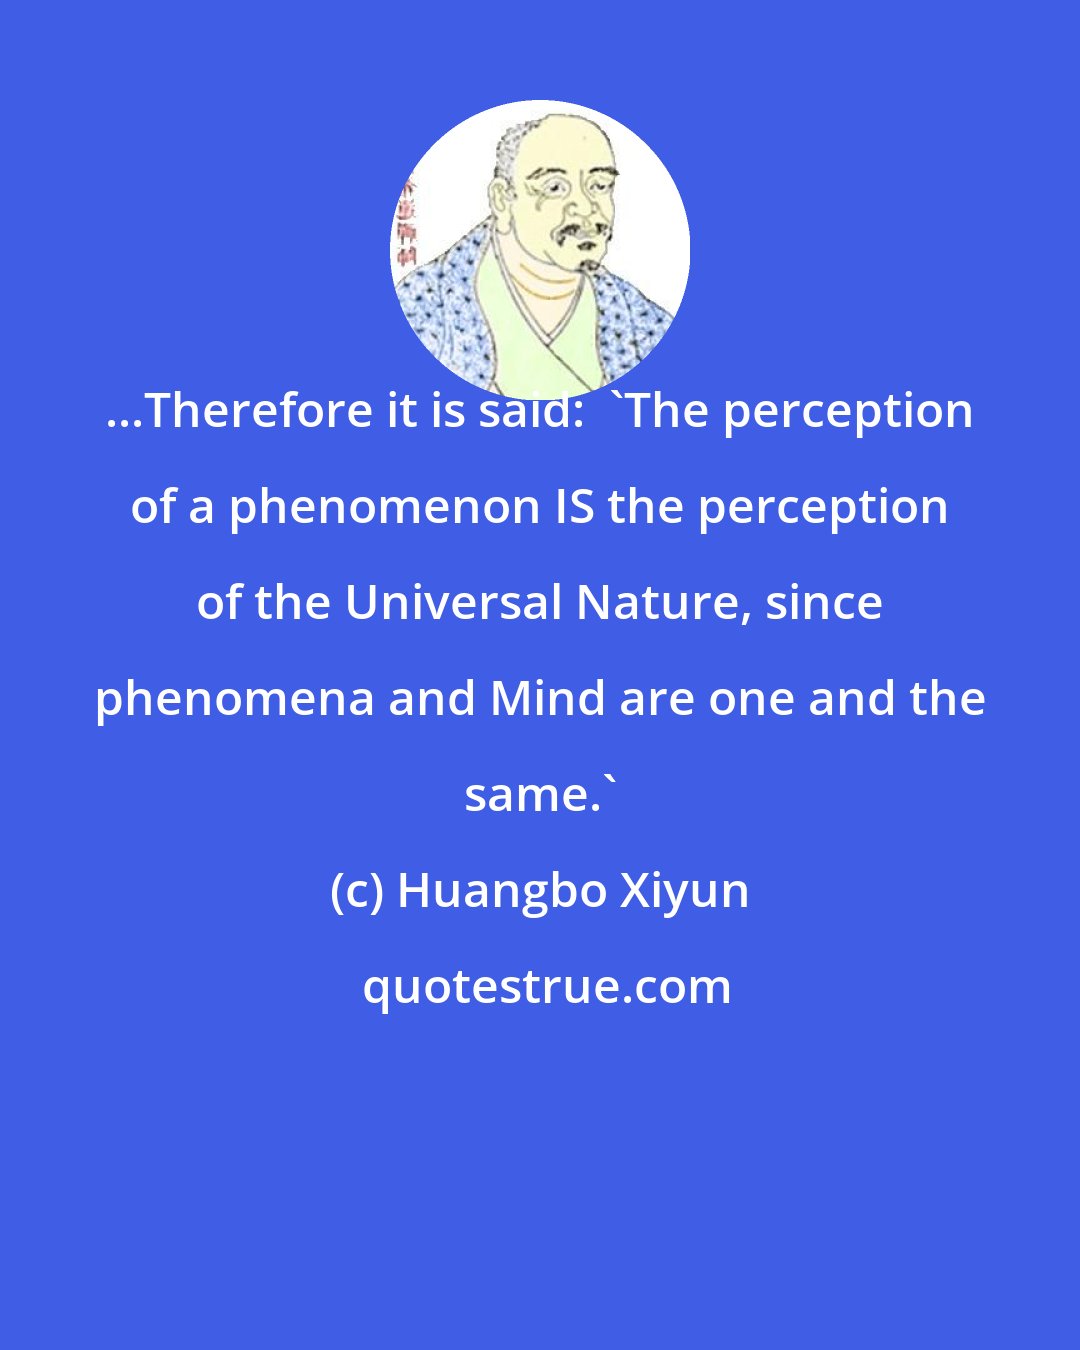 Huangbo Xiyun: ...Therefore it is said:  'The perception of a phenomenon IS the perception of the Universal Nature, since phenomena and Mind are one and the same.'